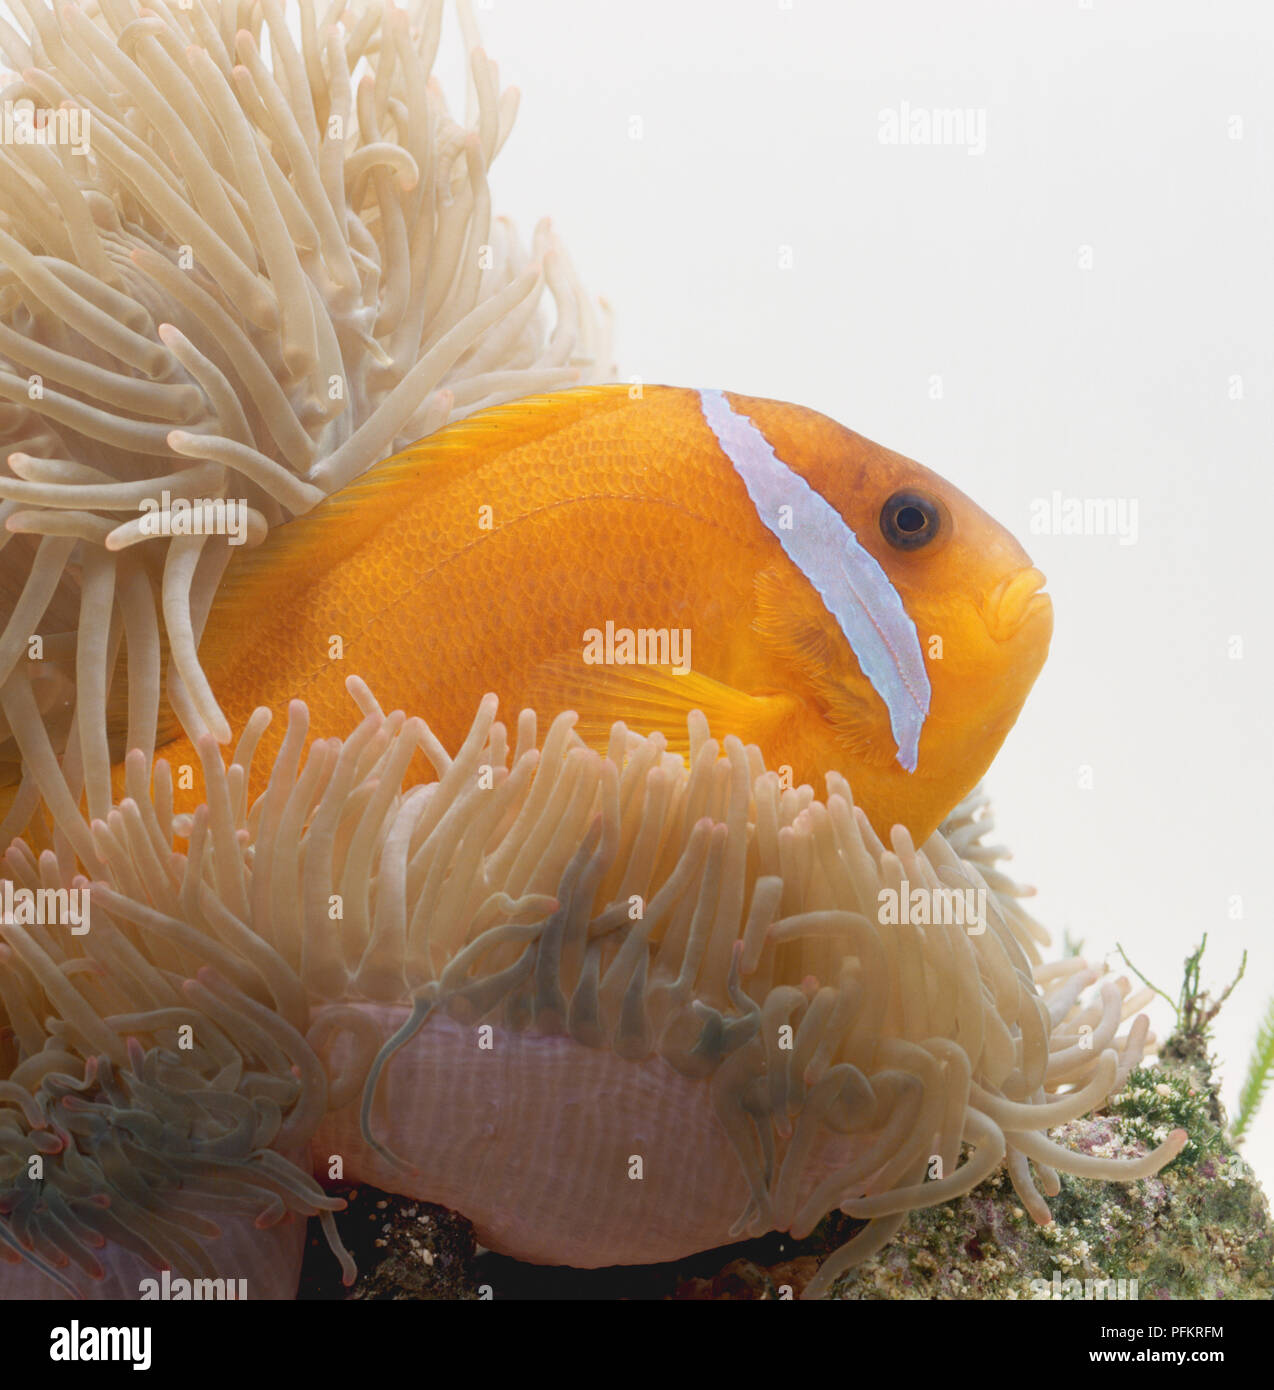 Clown Fish (Amphiprion sp.) poking head out from Sea Anemone (Actinaria) Stock Photo